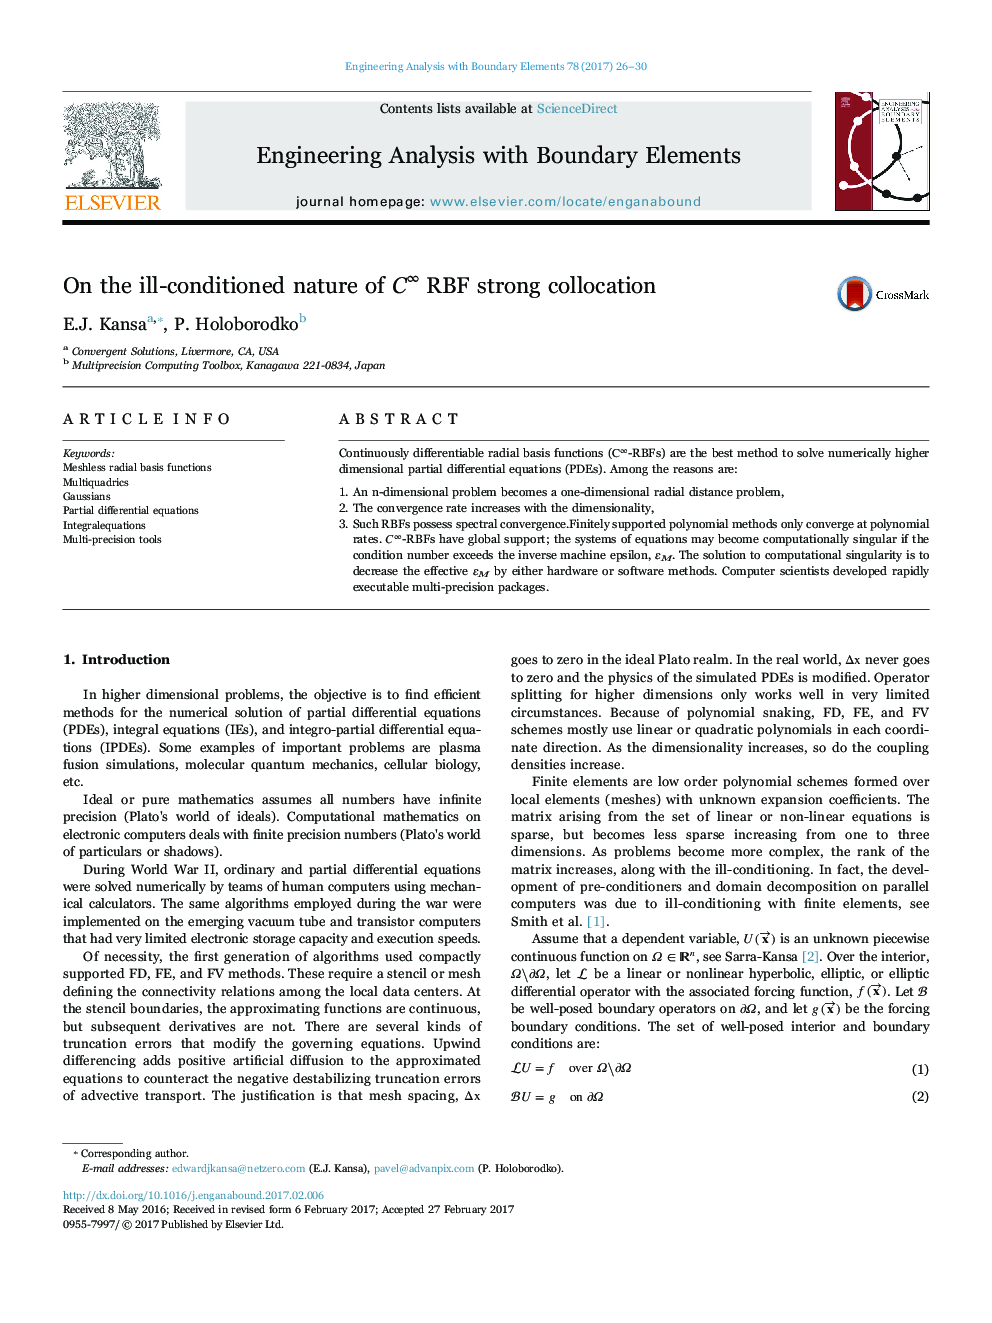 On the ill-conditioned nature of Câ RBF strong collocation